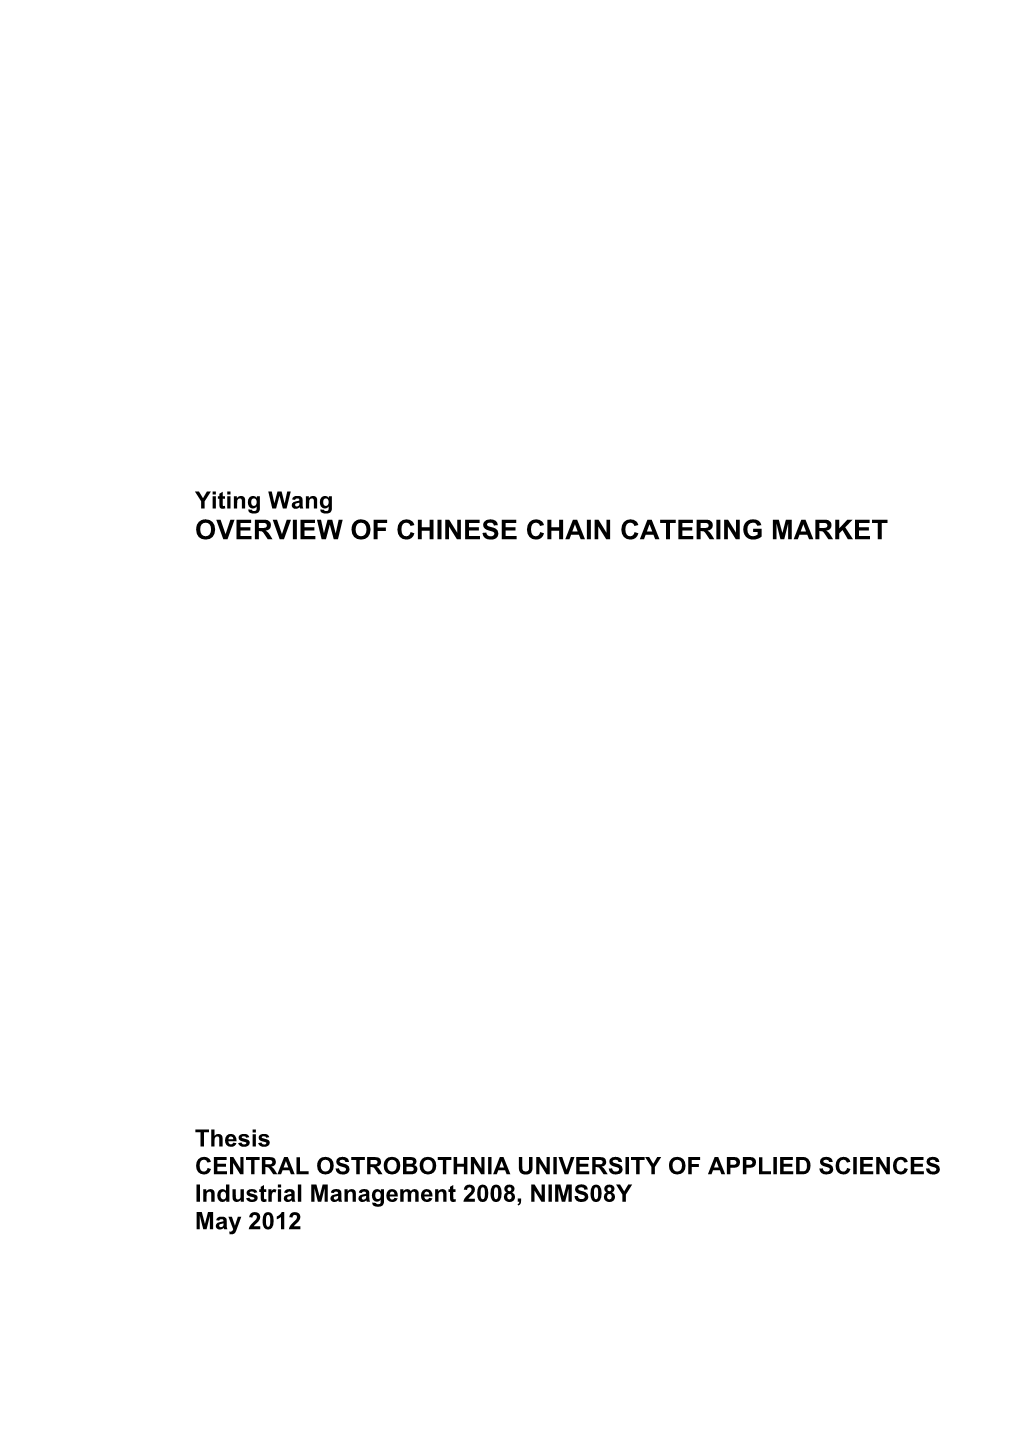 Overview of Chinese Chain Catering Market